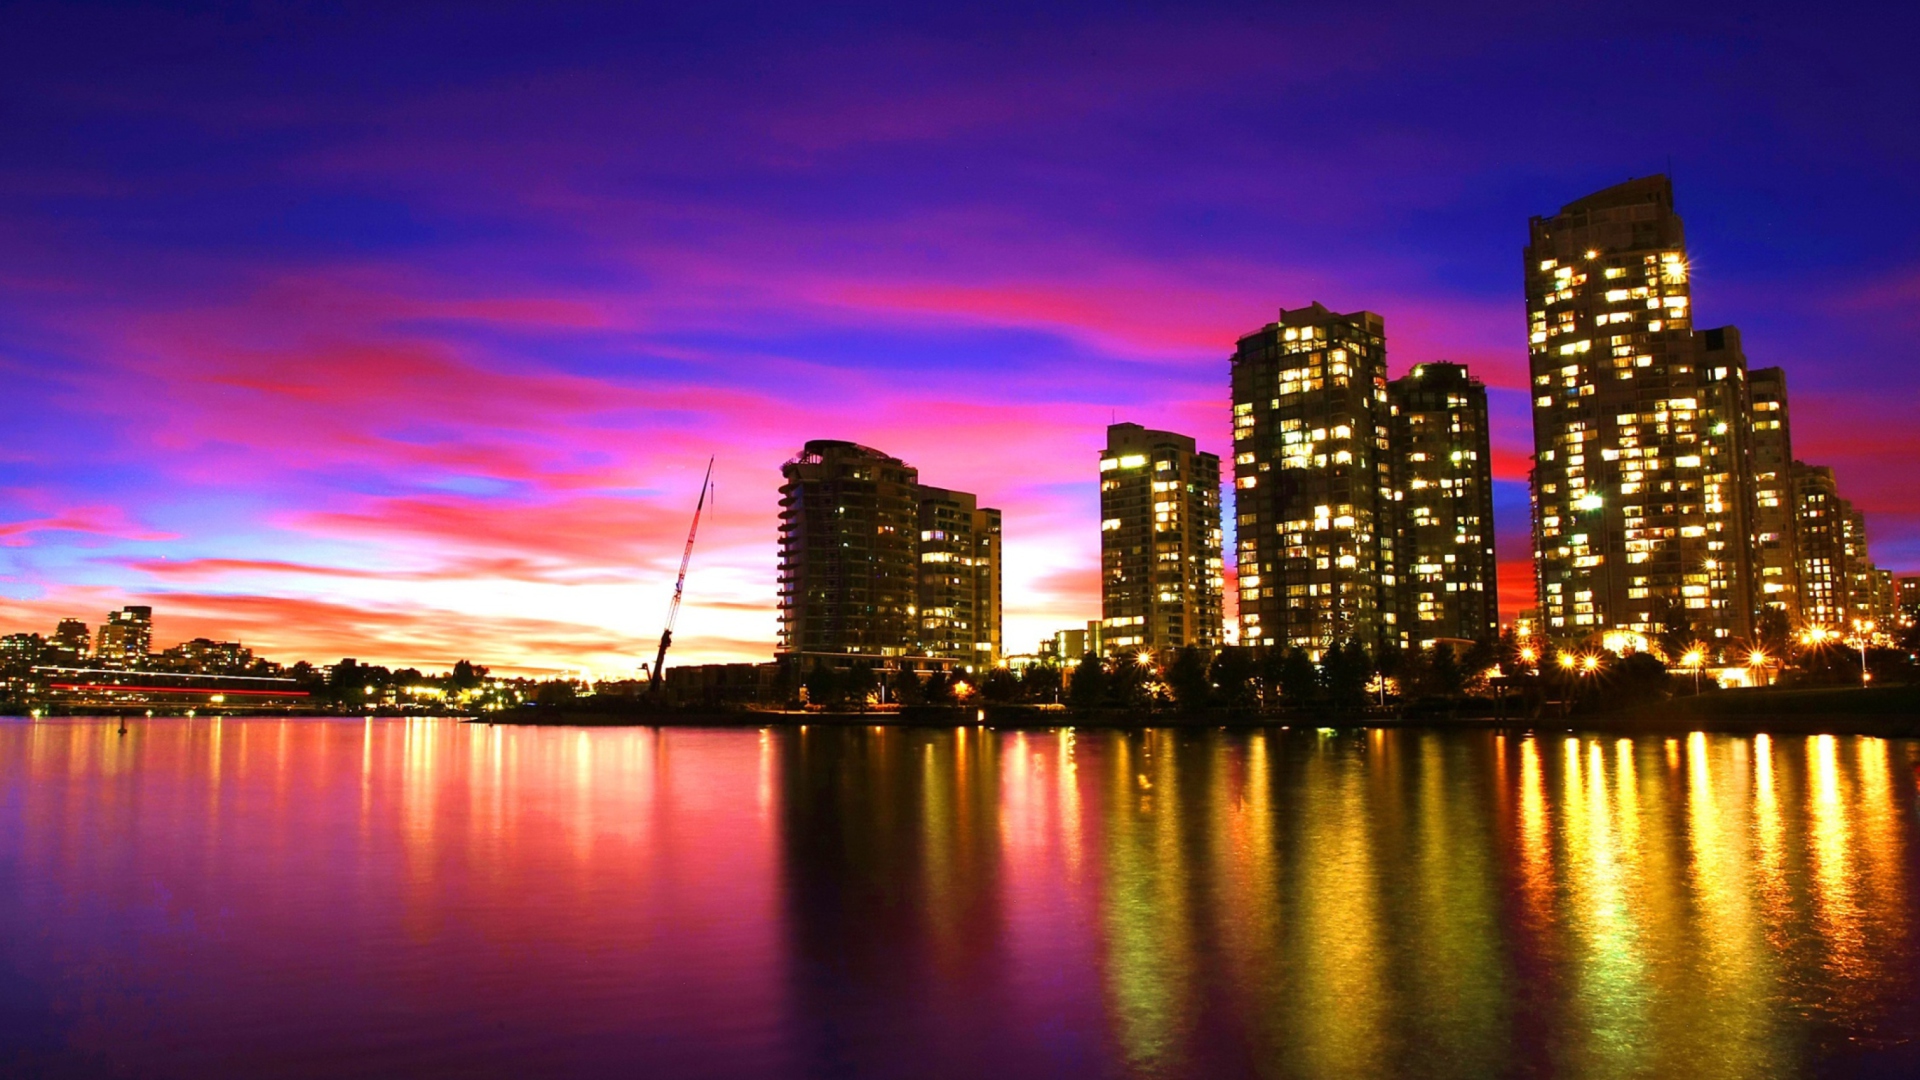 Vancouver Sunset Canada wallpaper 1920x1080